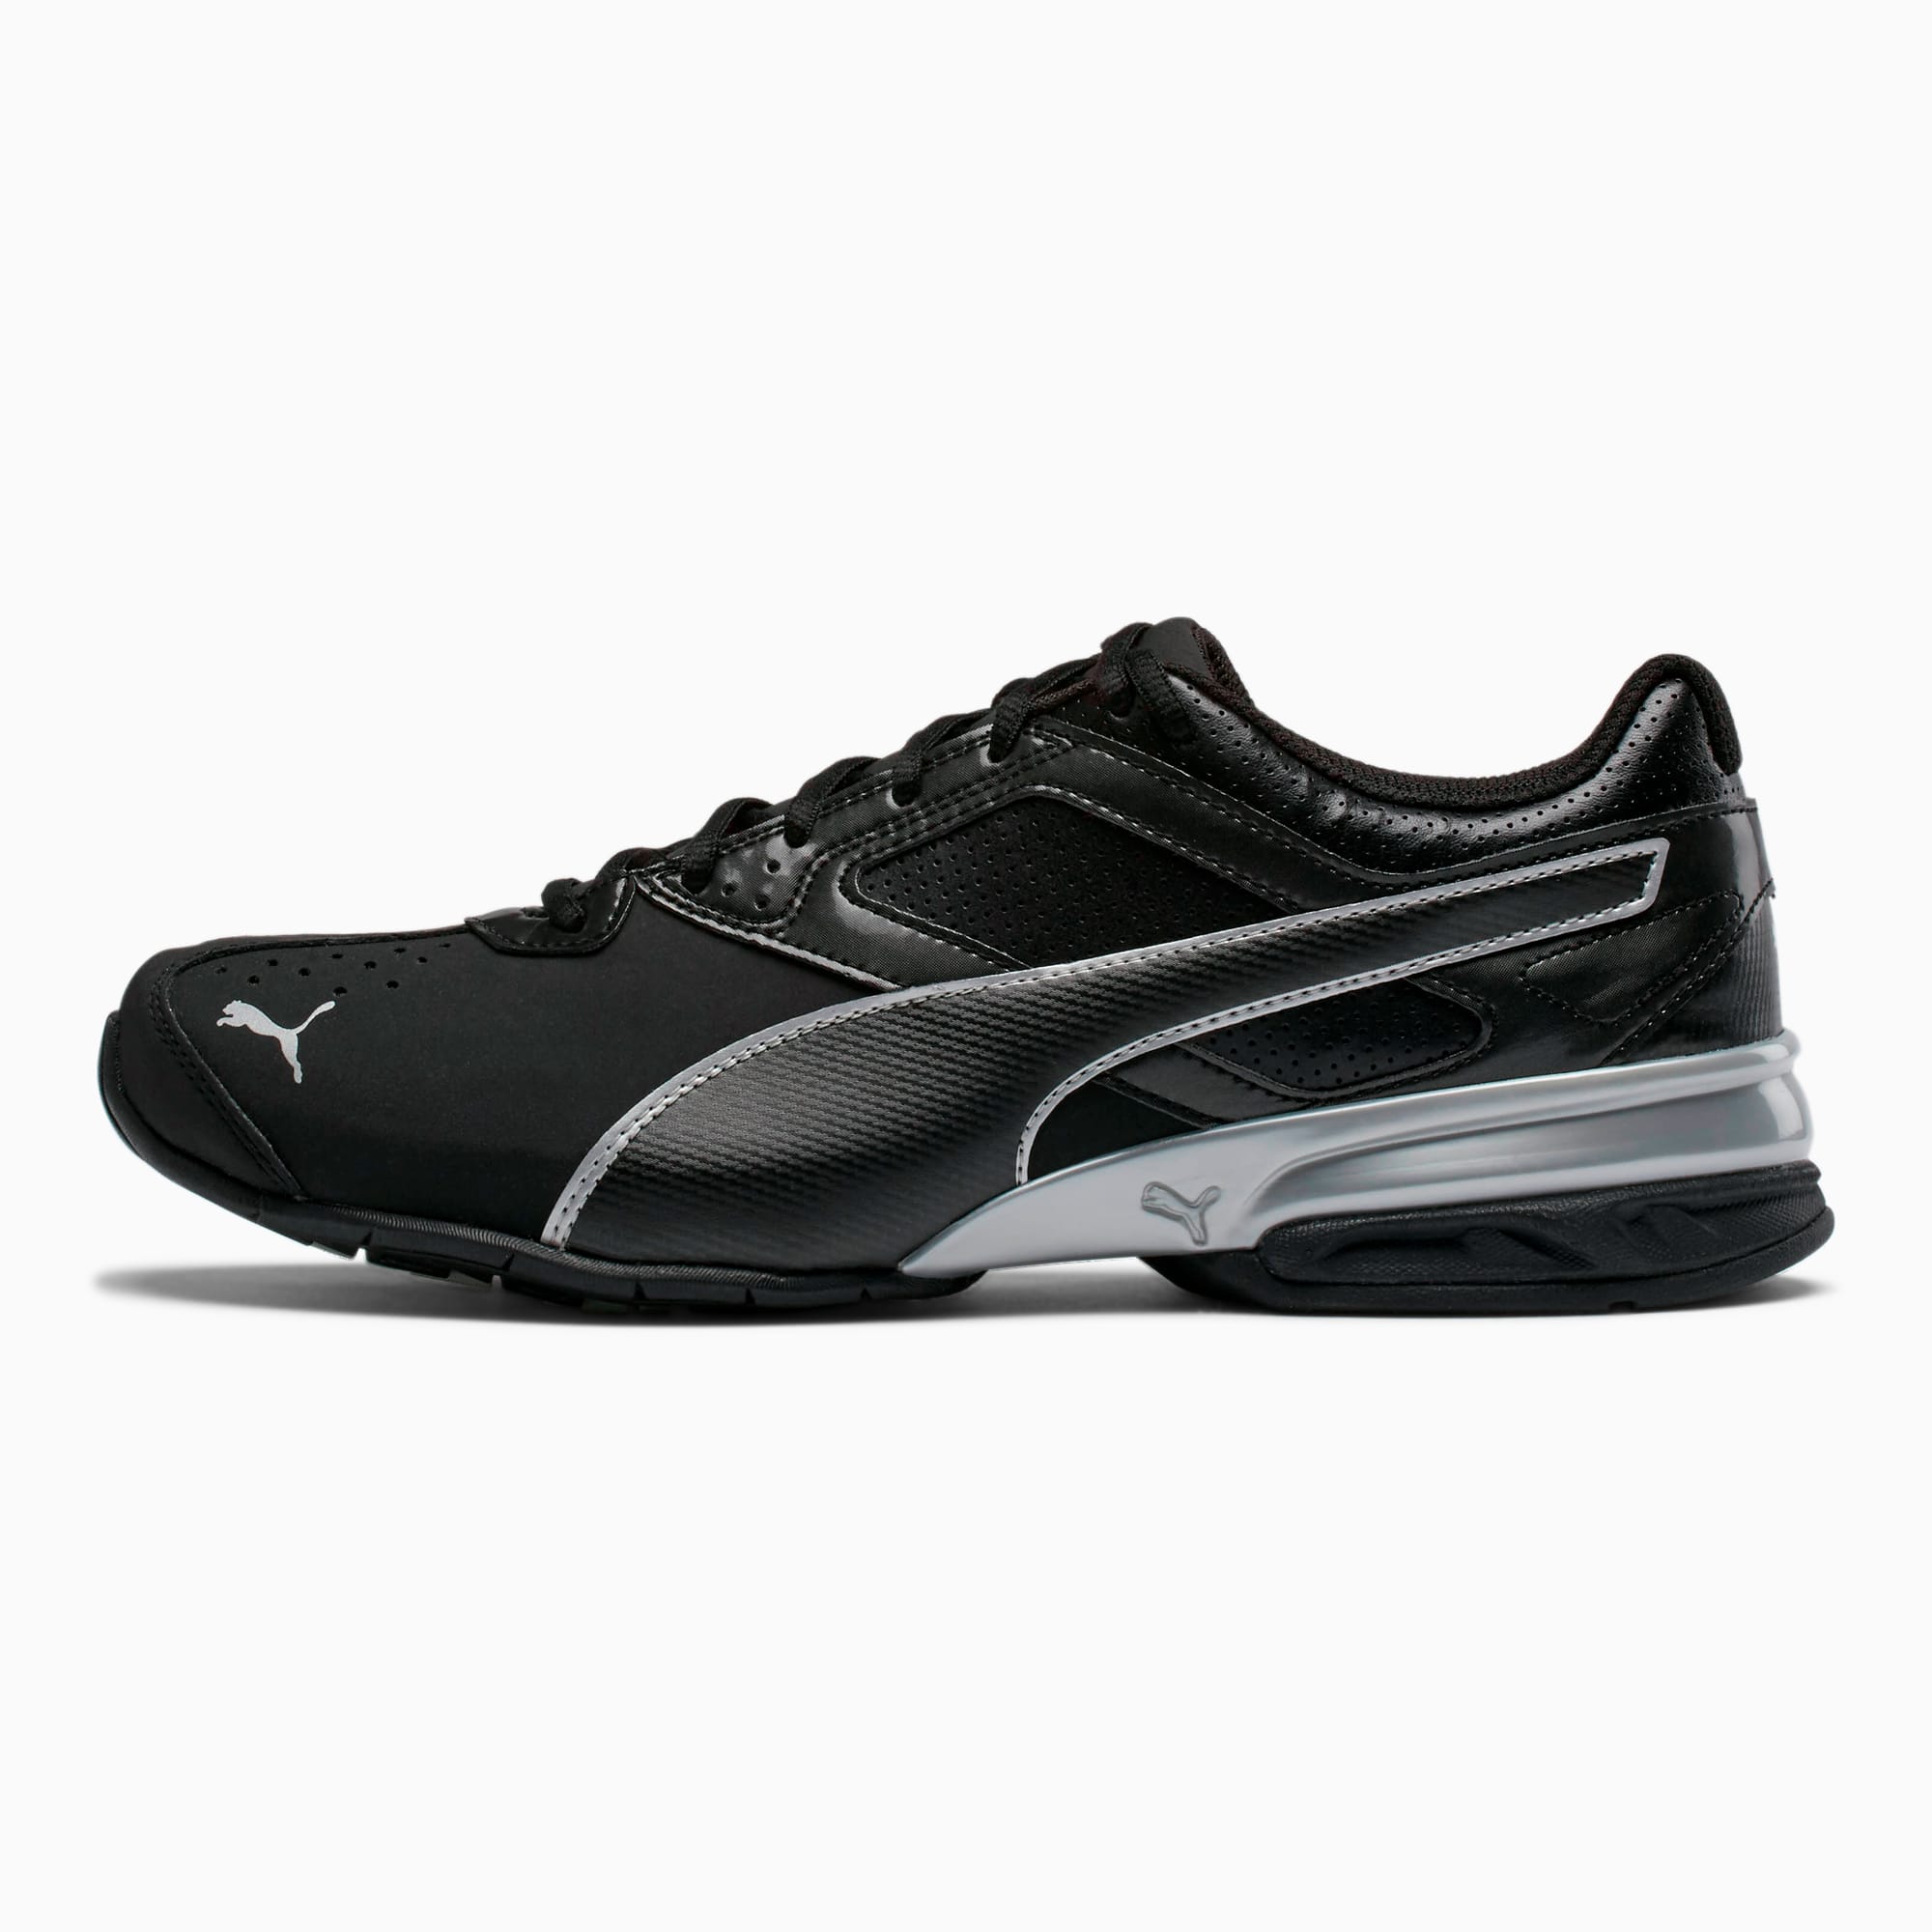 Puma 30% Off: Men's Tazon 6 FM Sneakers $31.50, Men's Power Color-BLocked Tee $10.50, Women's Smash v2 Sneakers $28  & More + Free Shipping on $50+